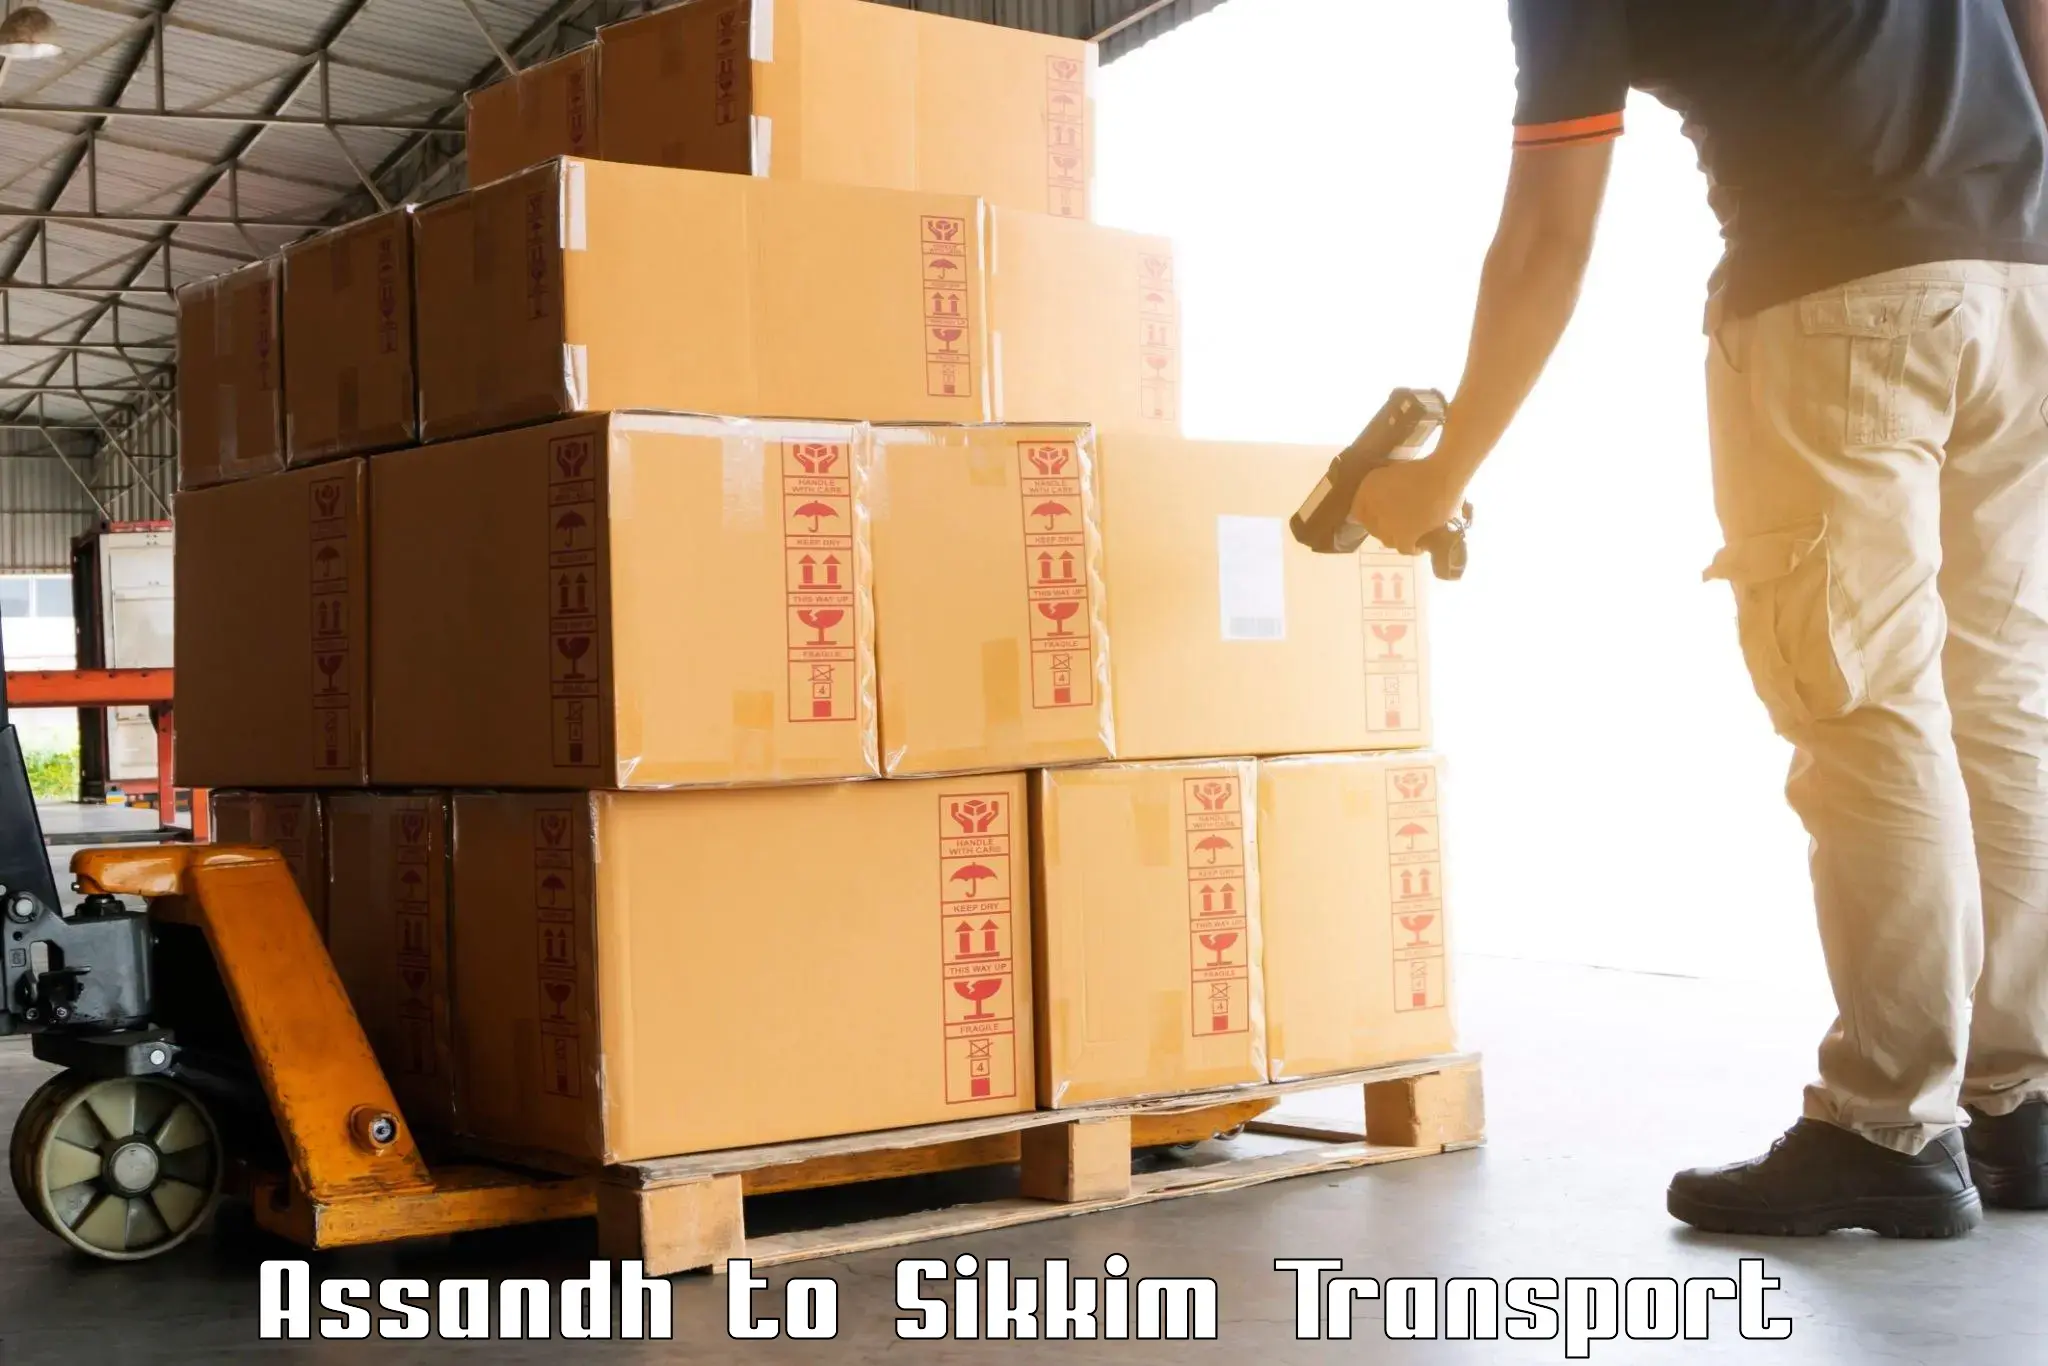 Shipping partner Assandh to Pelling